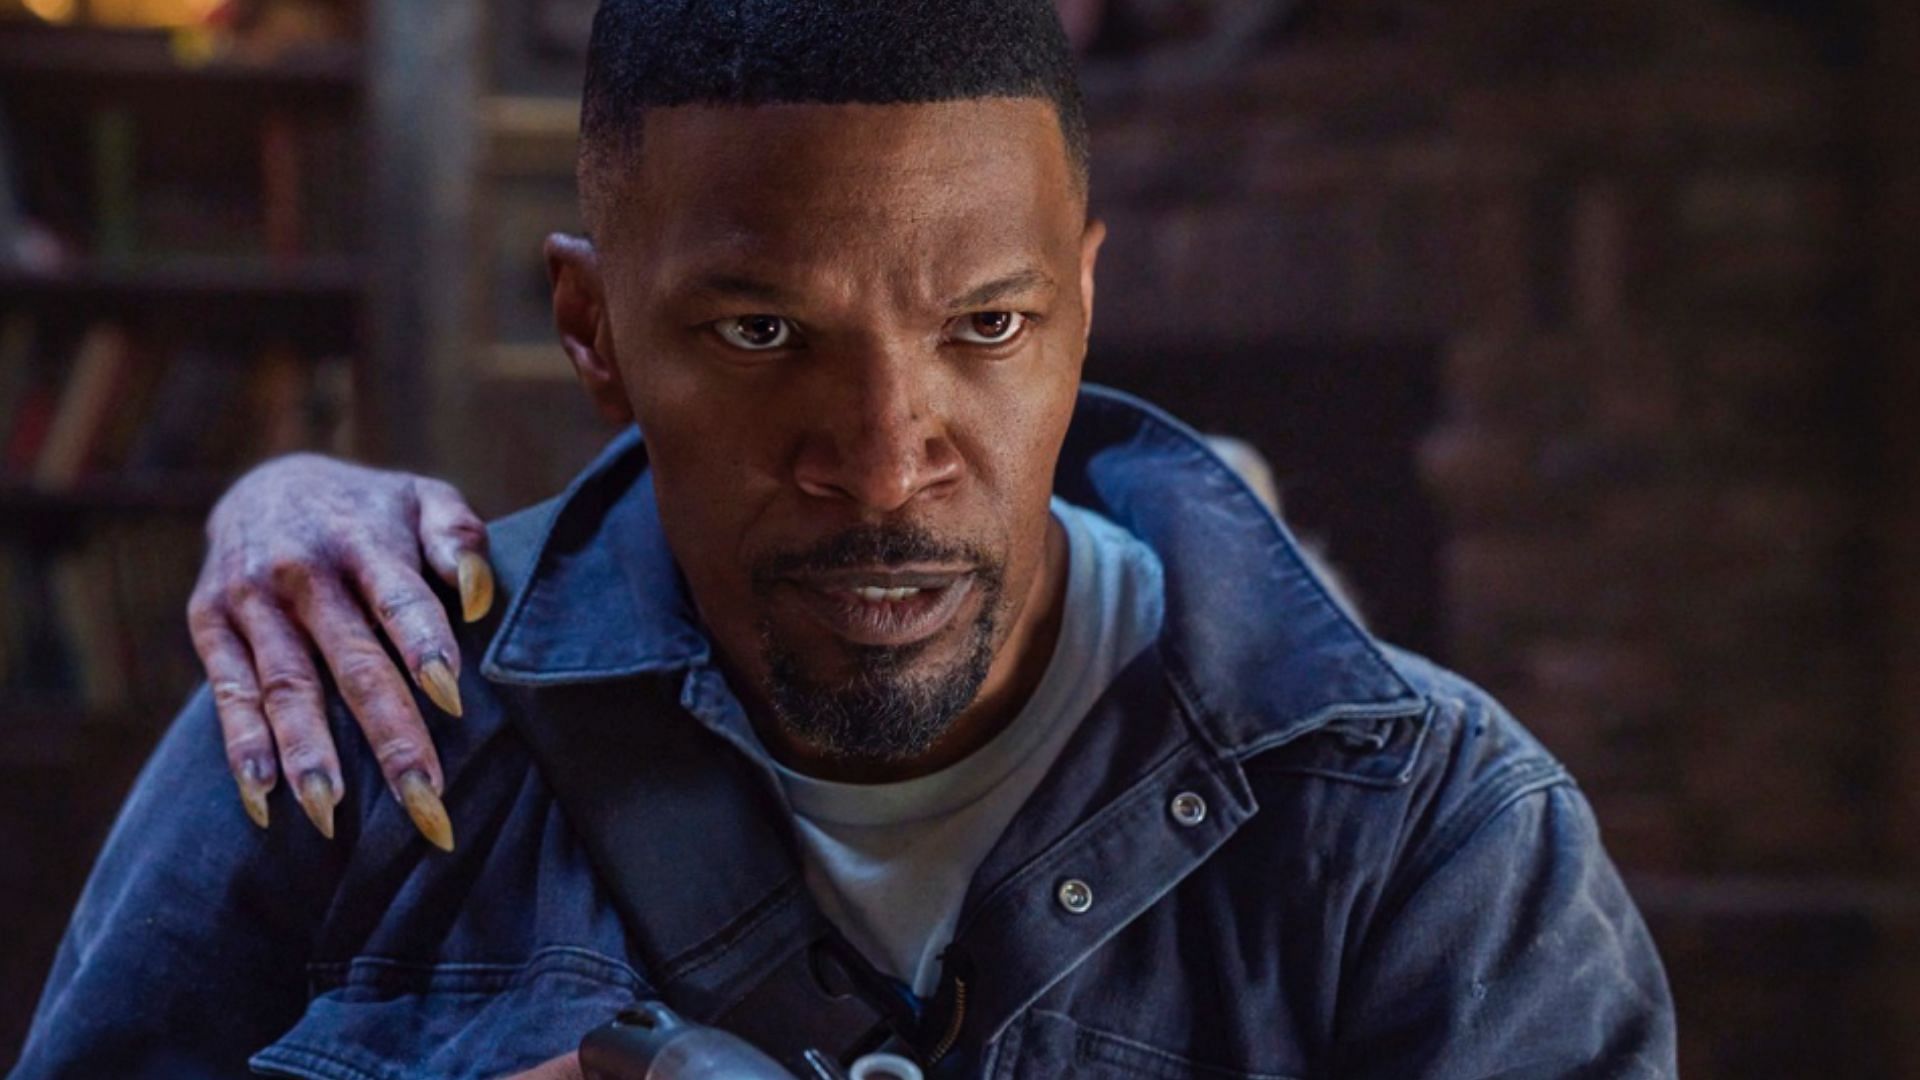 Jamie Foxx in Day Shift (Image via Rotten Tomatoes)